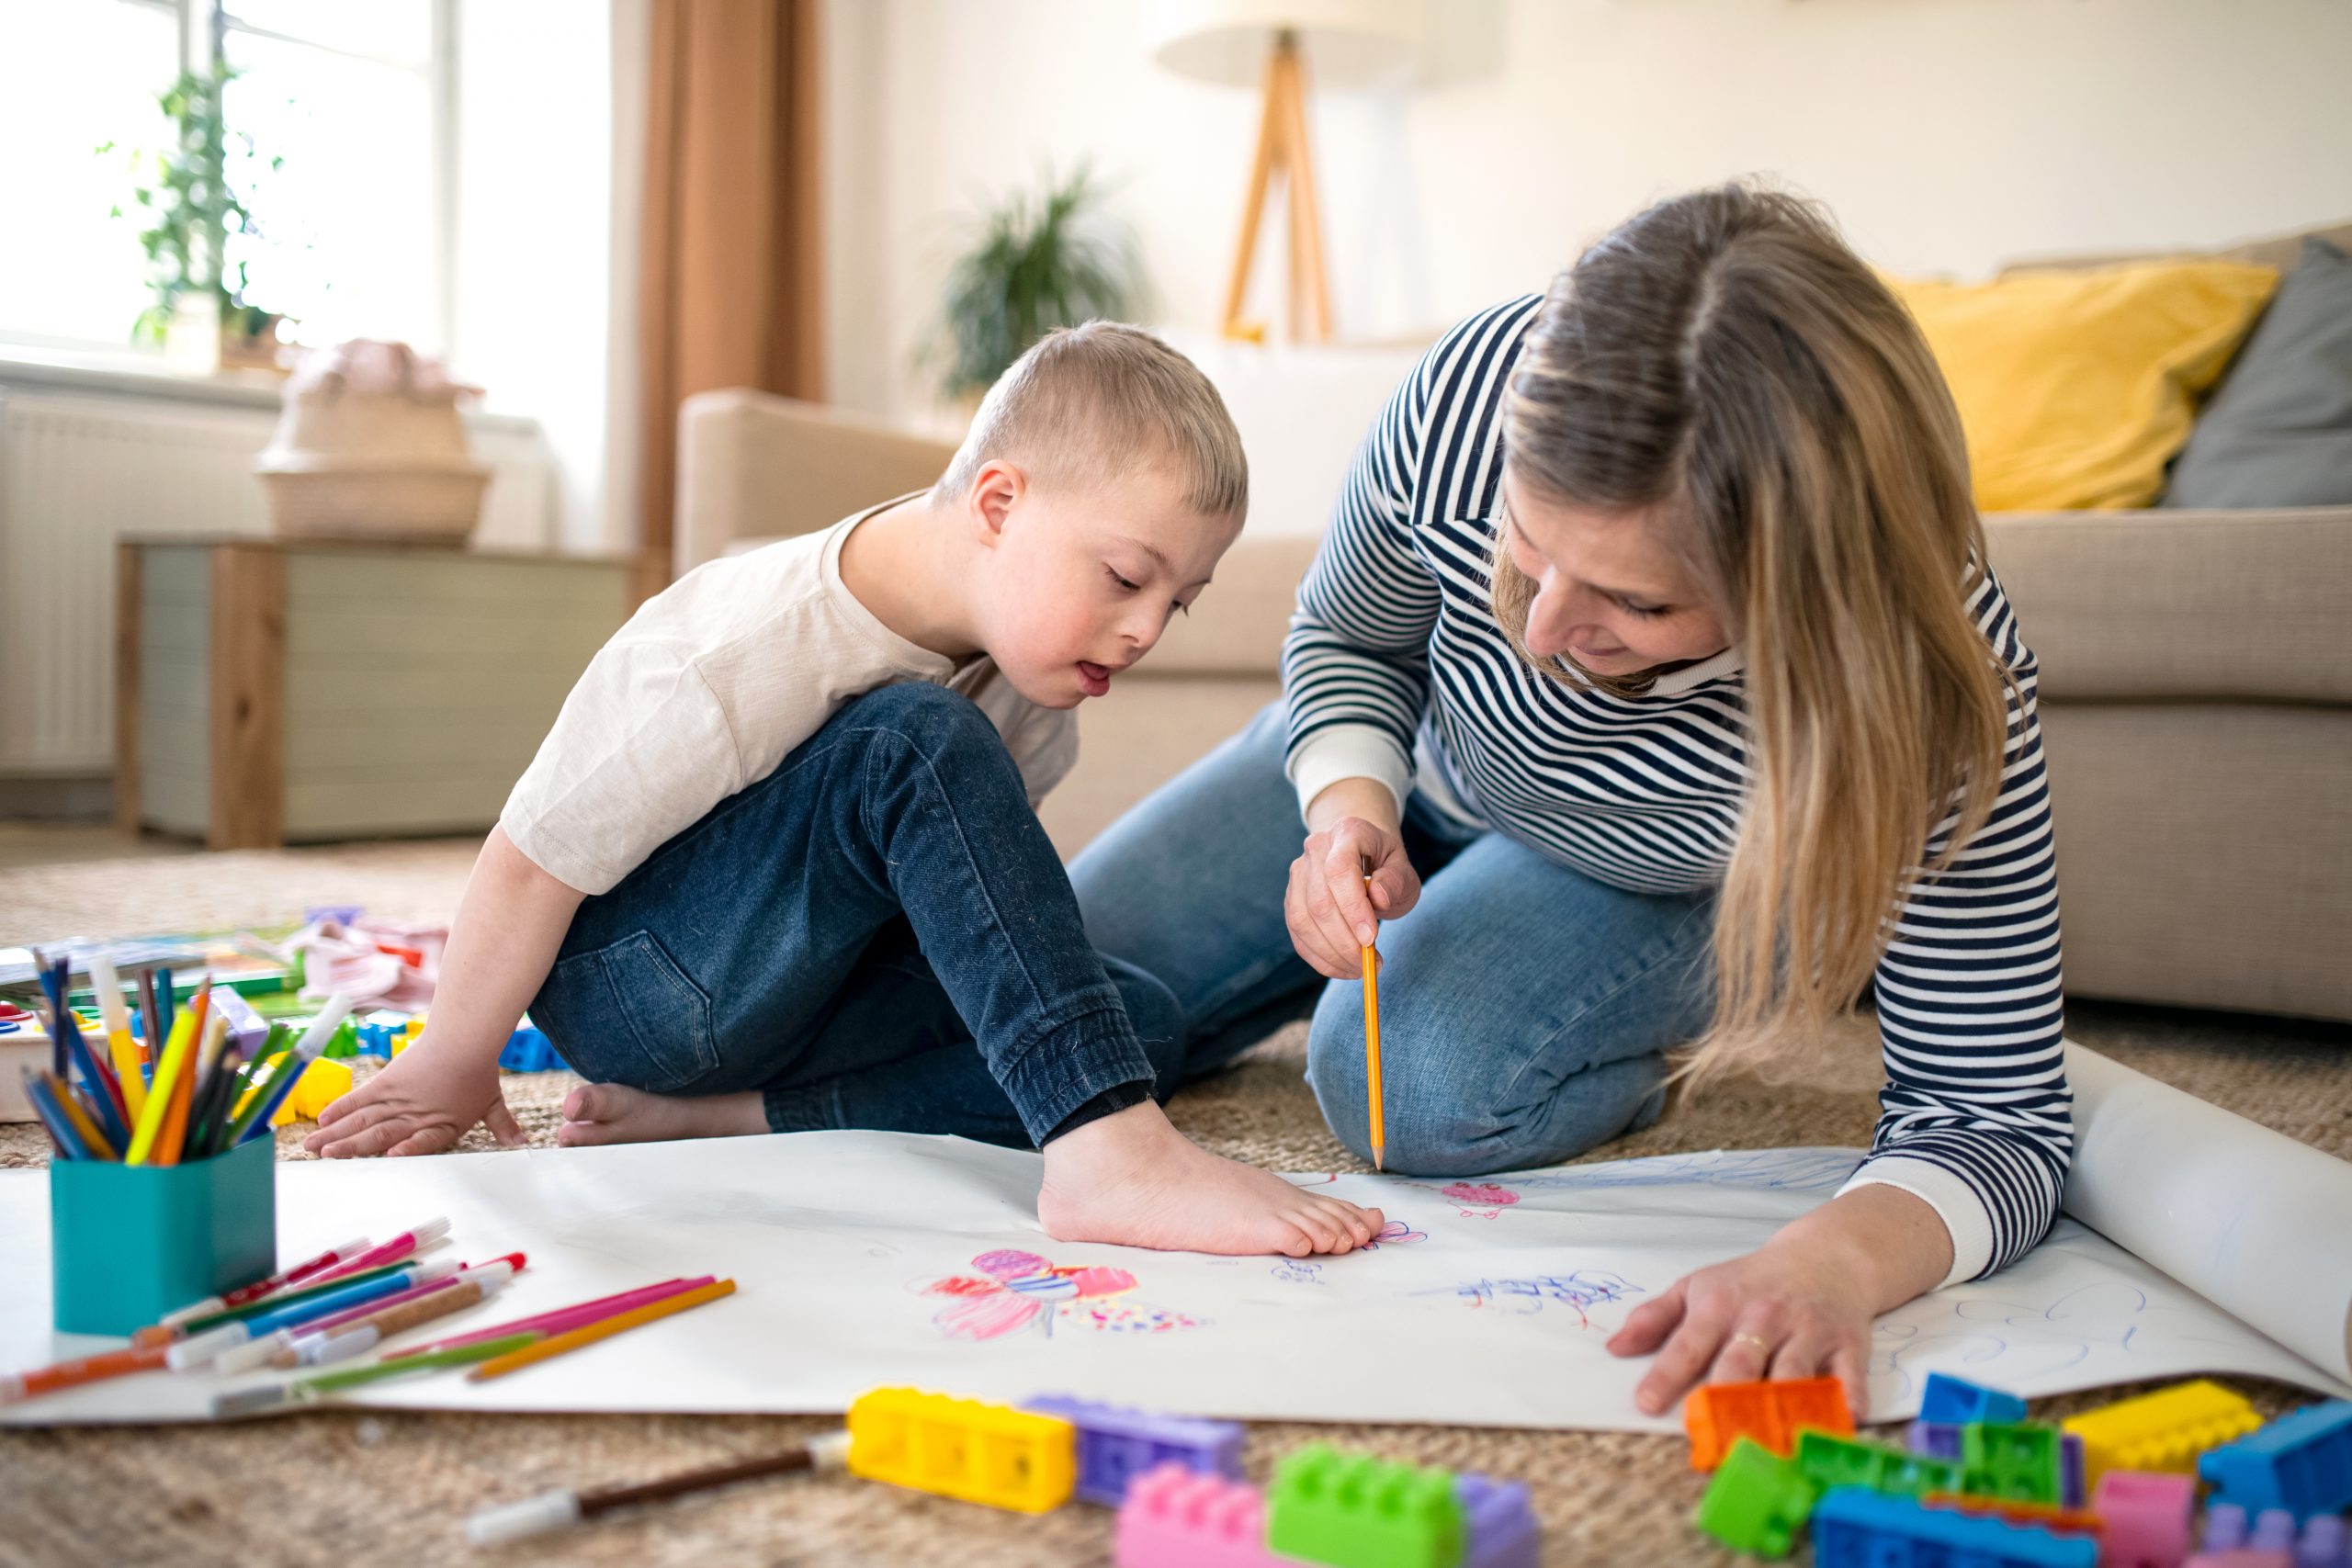 Child living with down syndrome drawing pictures with support worker in home environment